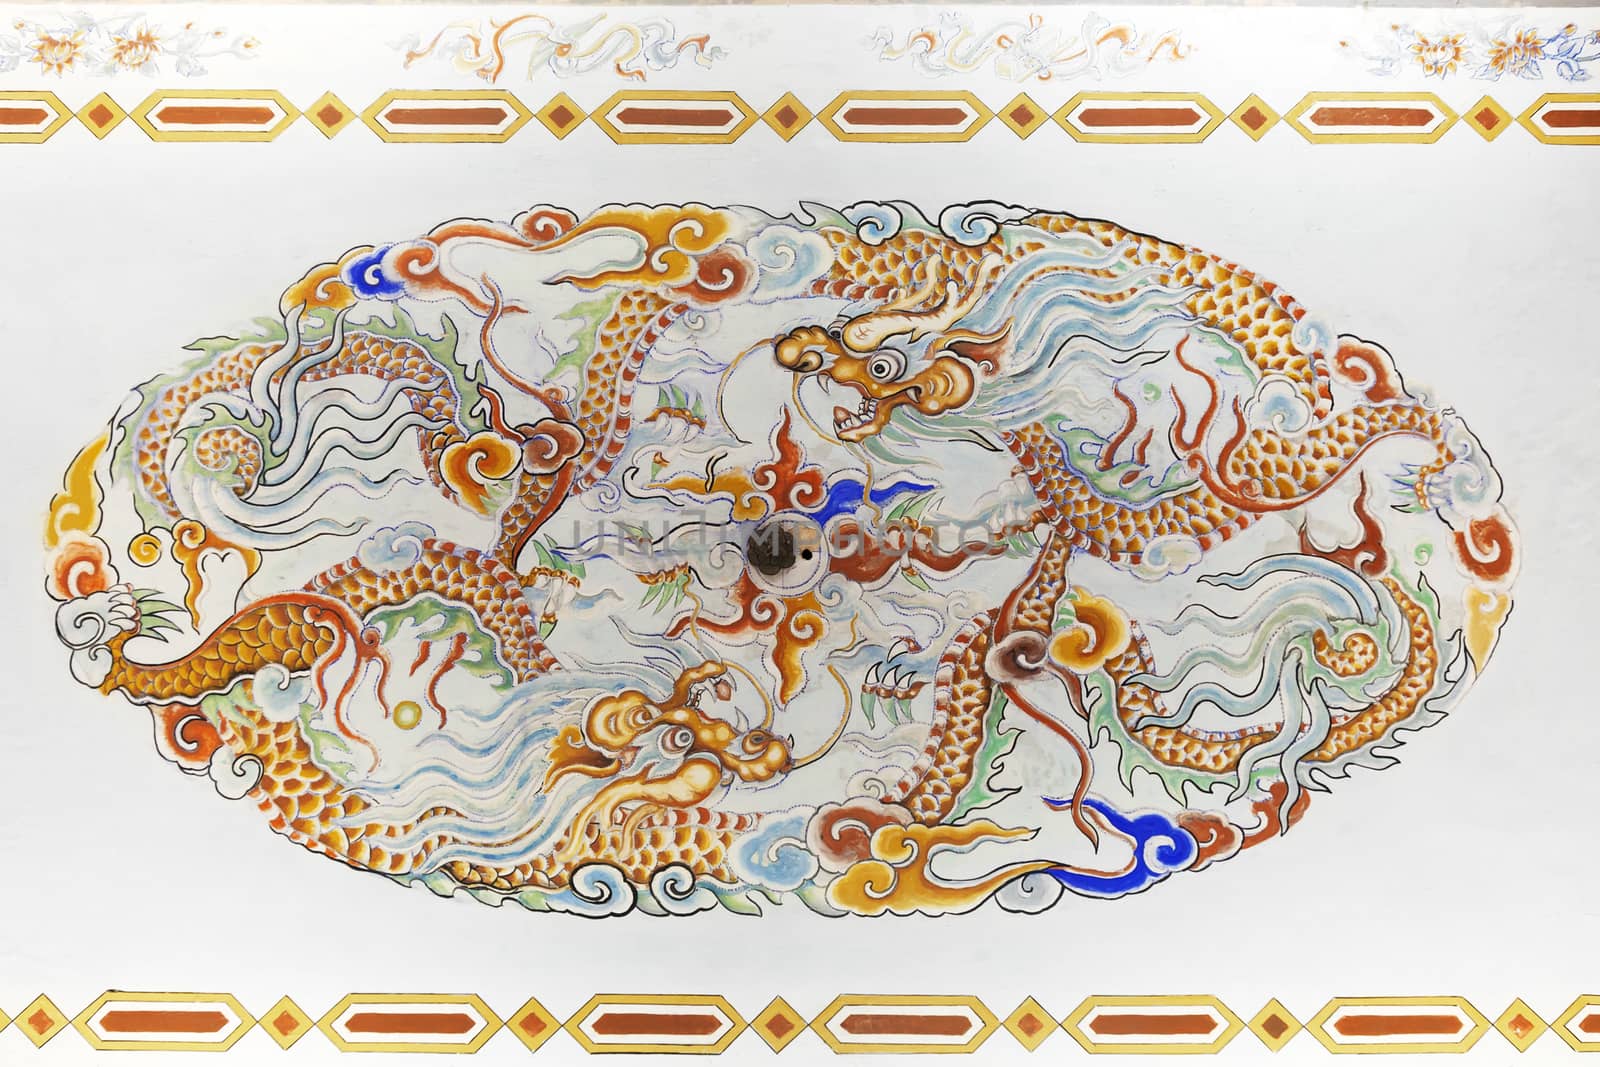 Dragon decoration on a ceiling in Imperial City, Hue, Vietnam